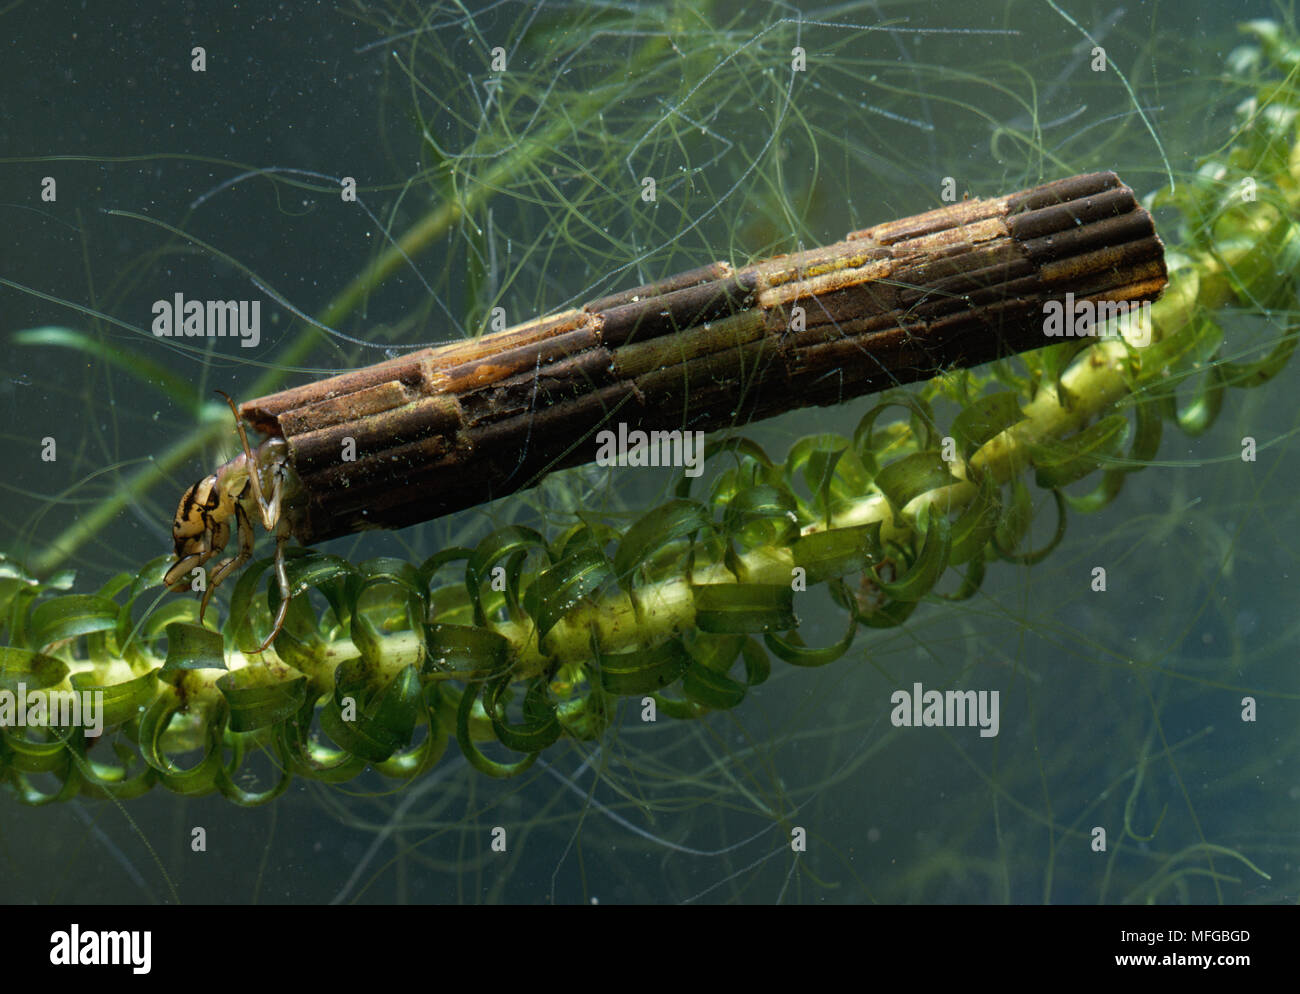 CADDIS-FLY LARVA  Fam. Phryganeidae in a case made of reed stems Stock Photo